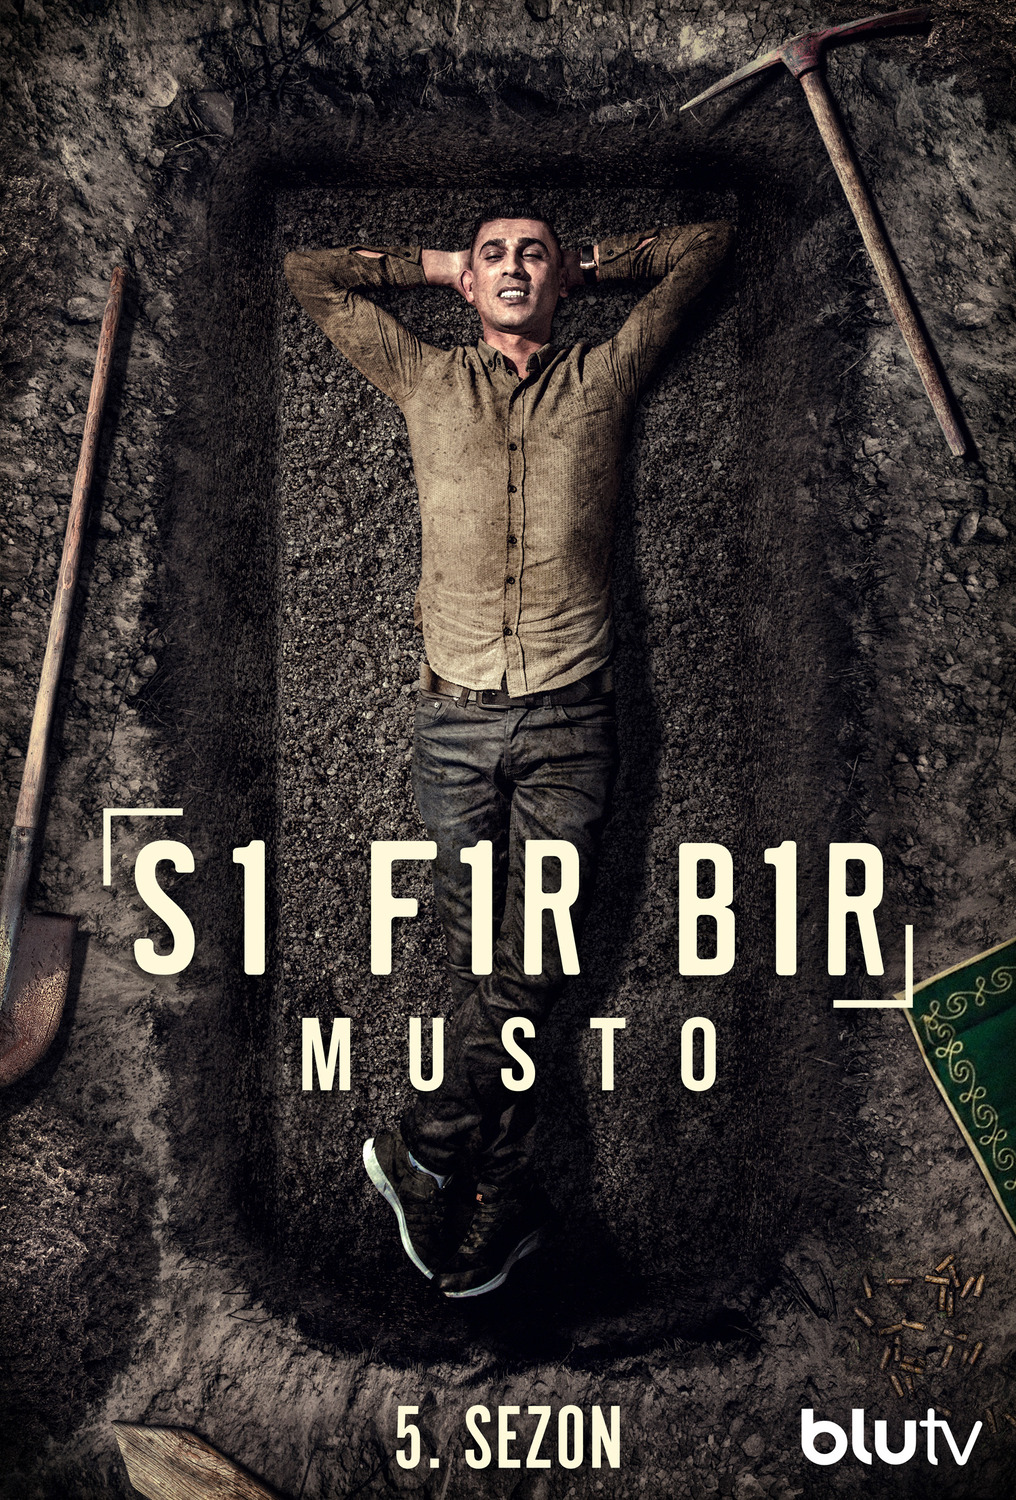 Extra Large TV Poster Image for Sifir Bir (#16 of 23)